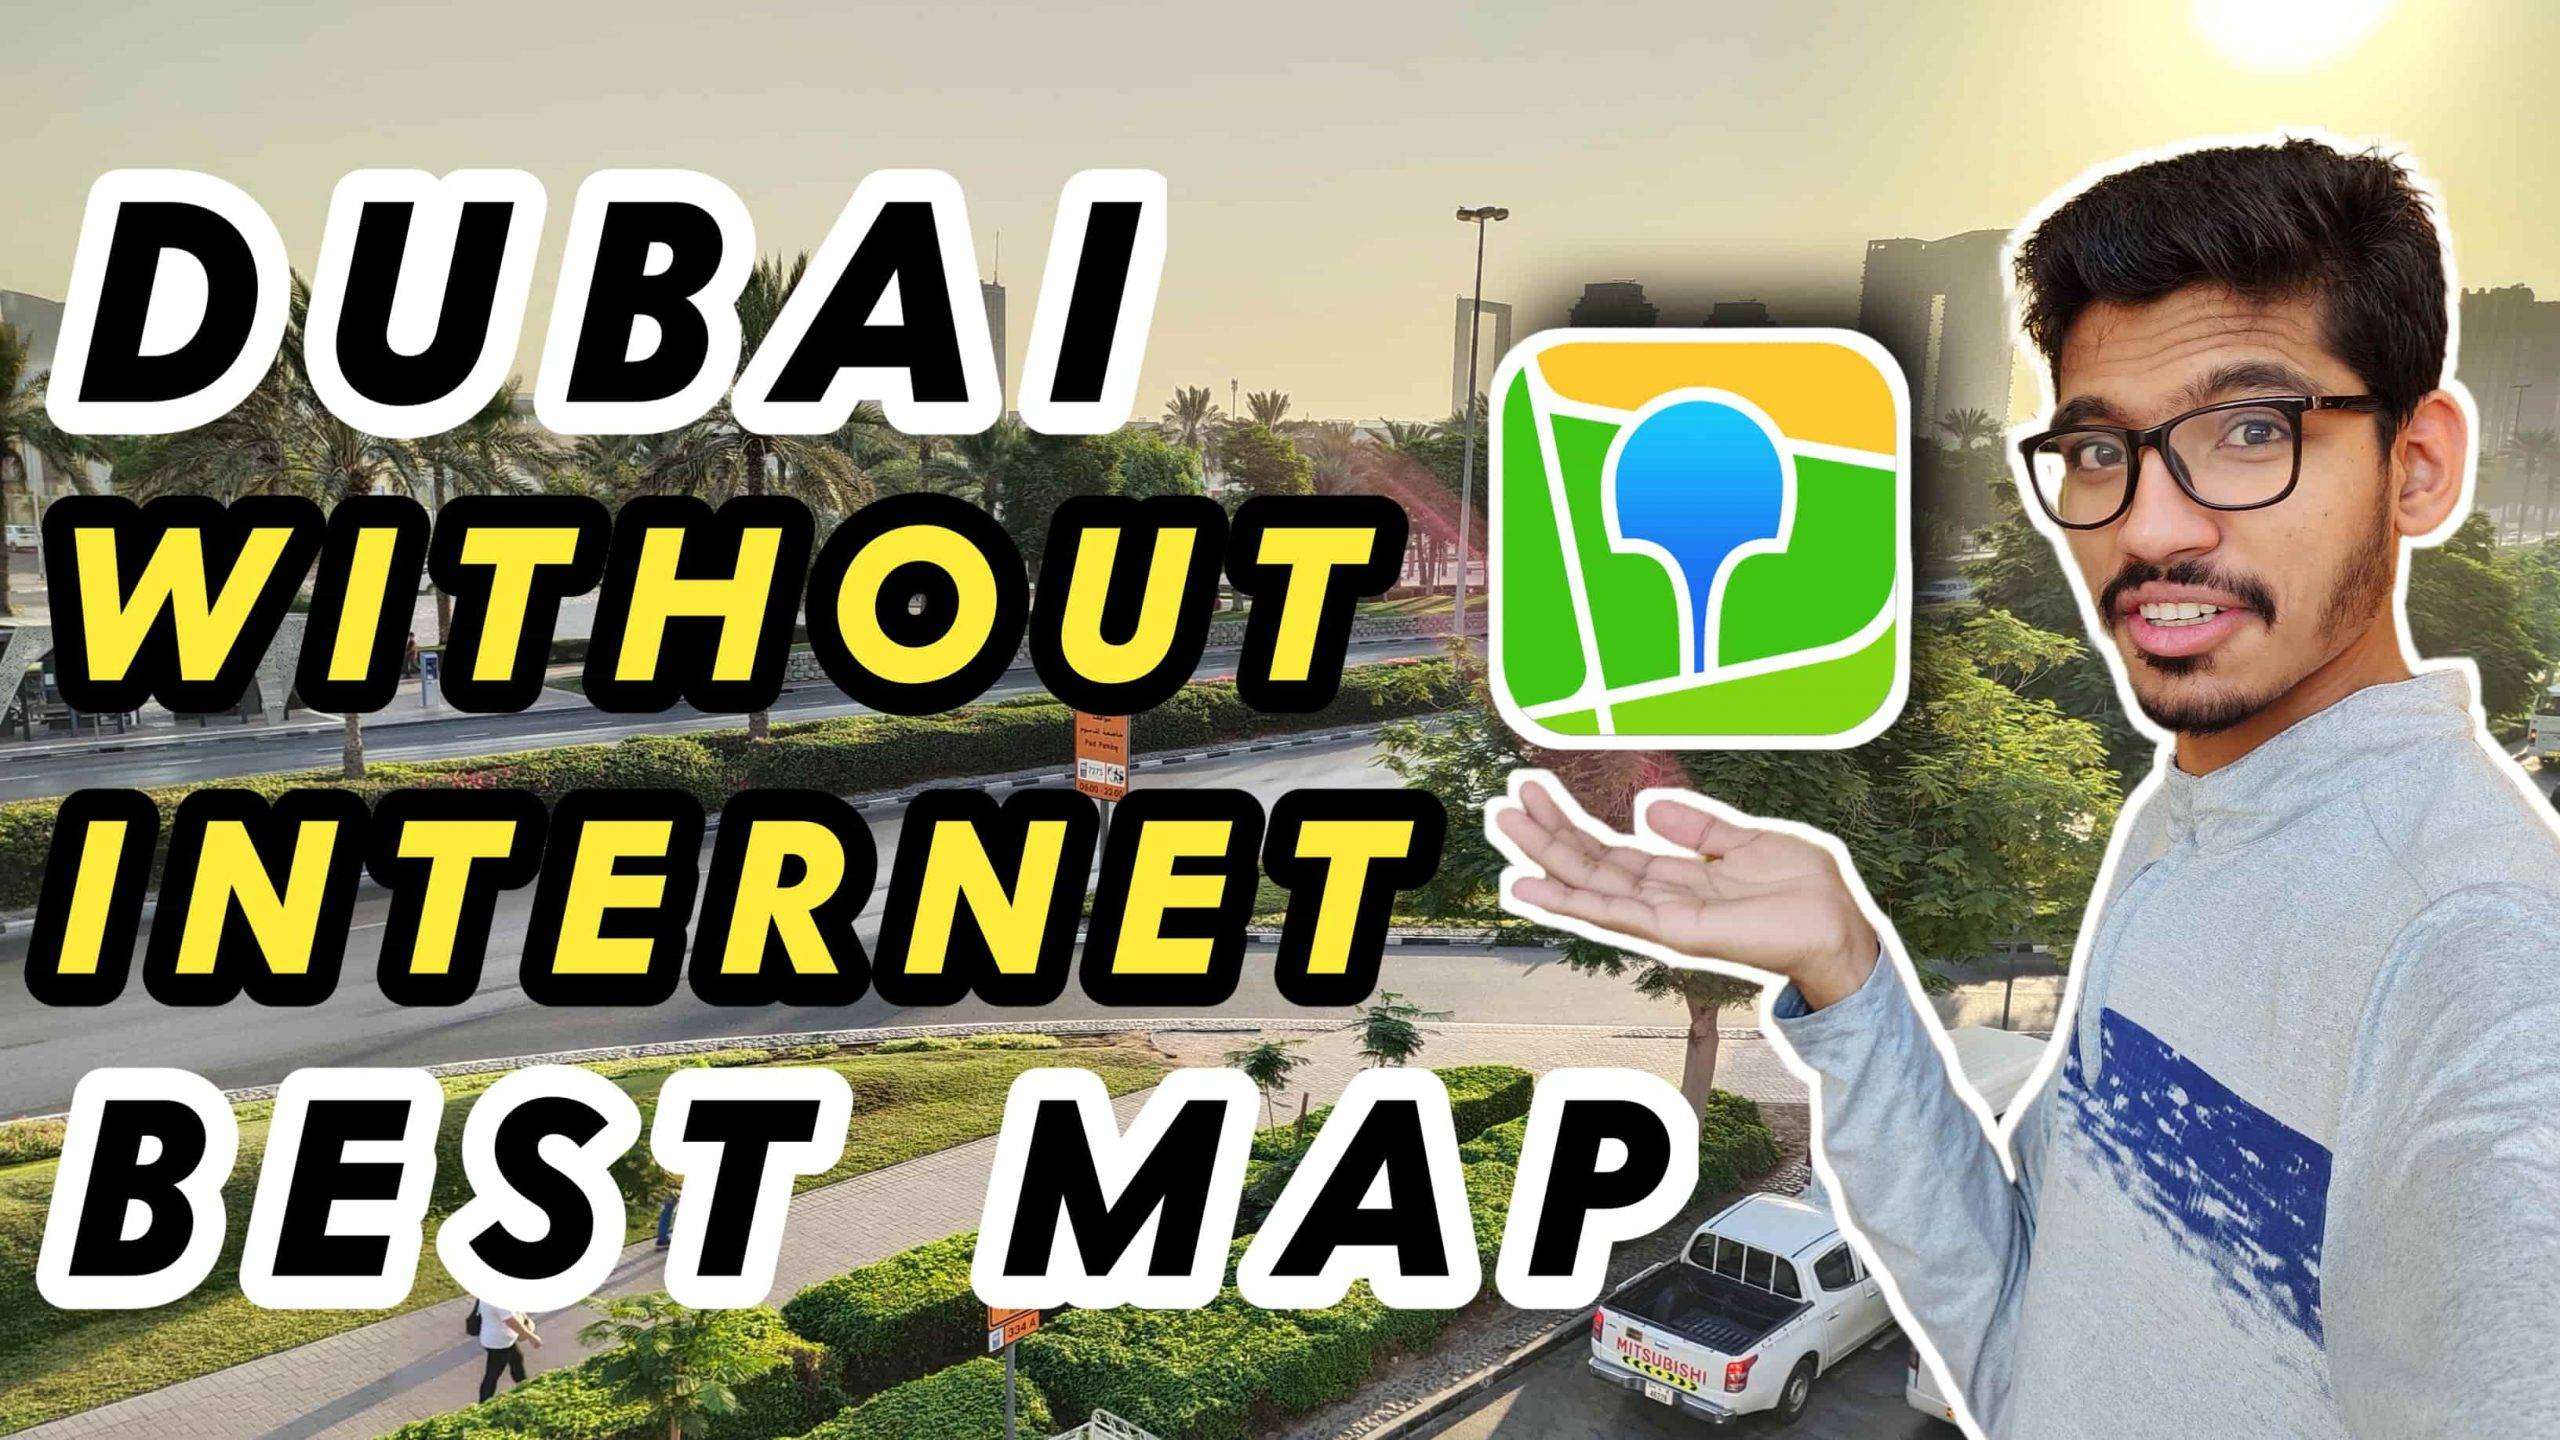 Dubai Bes map without internet work